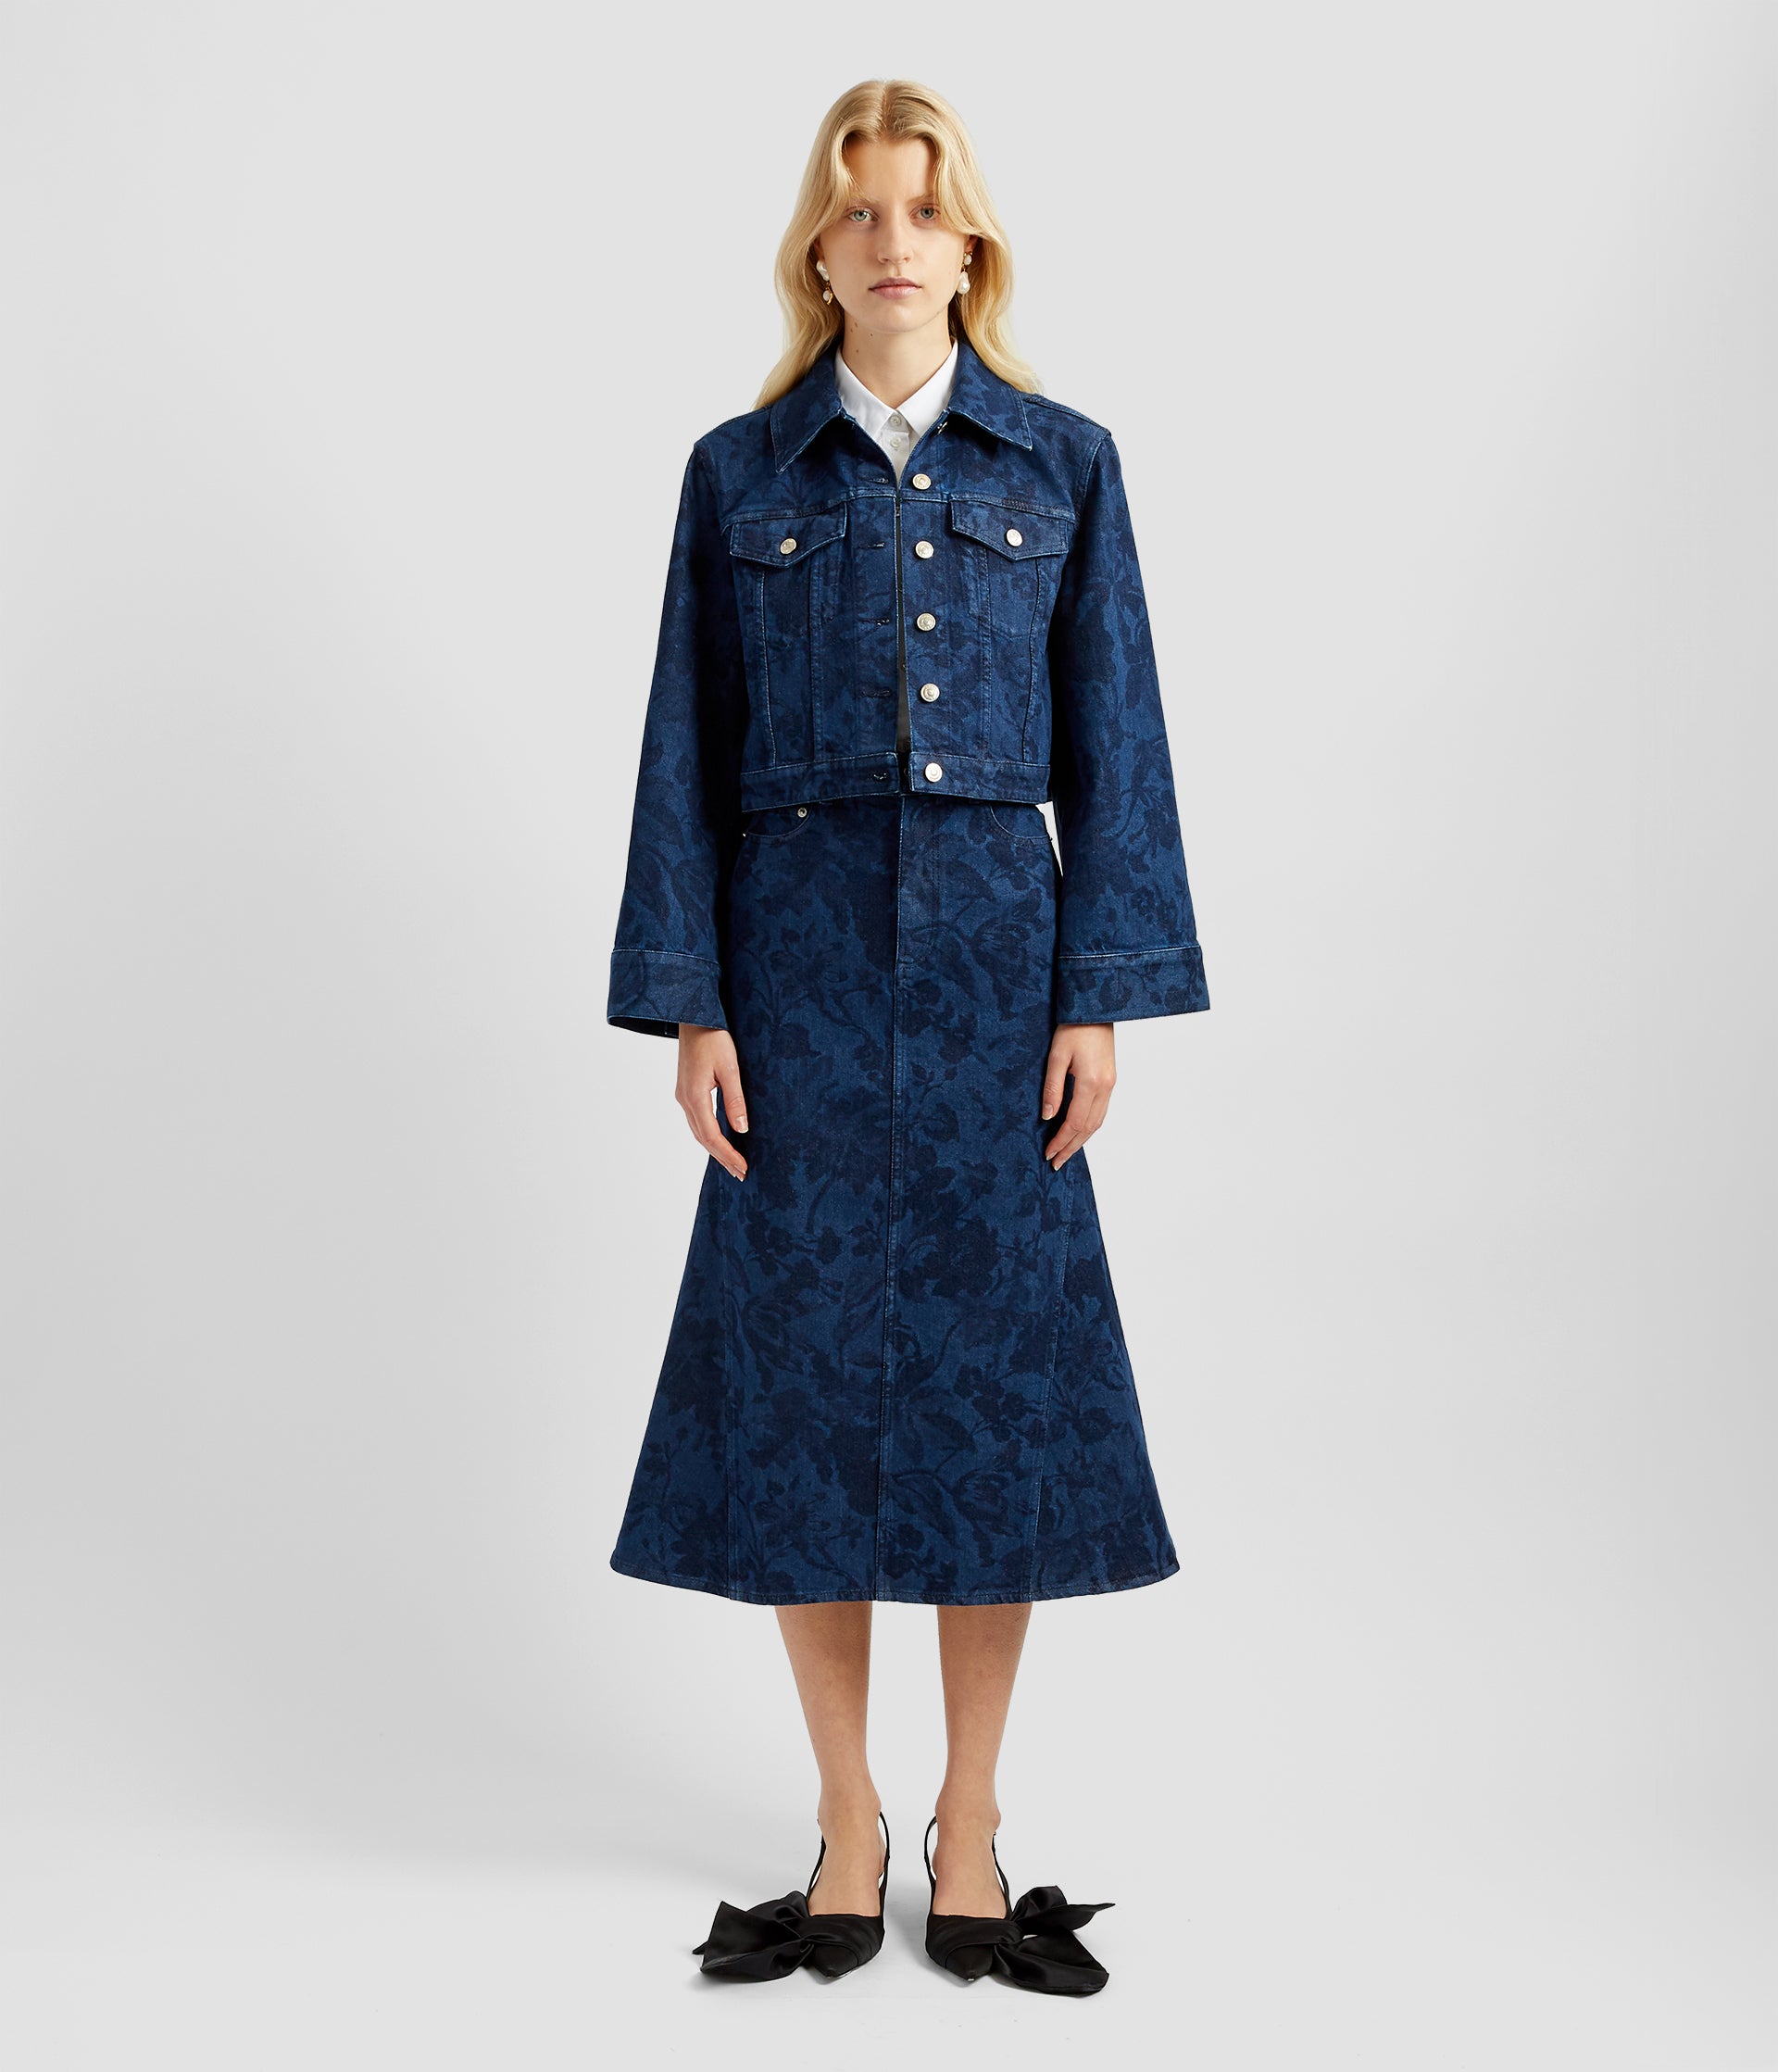 A cropped boxy floral print denim jacket with a wide sleeve that flares at the wrist, The boxy cropped floral denim jacket is worn with the matching floral aline midi skirt. 